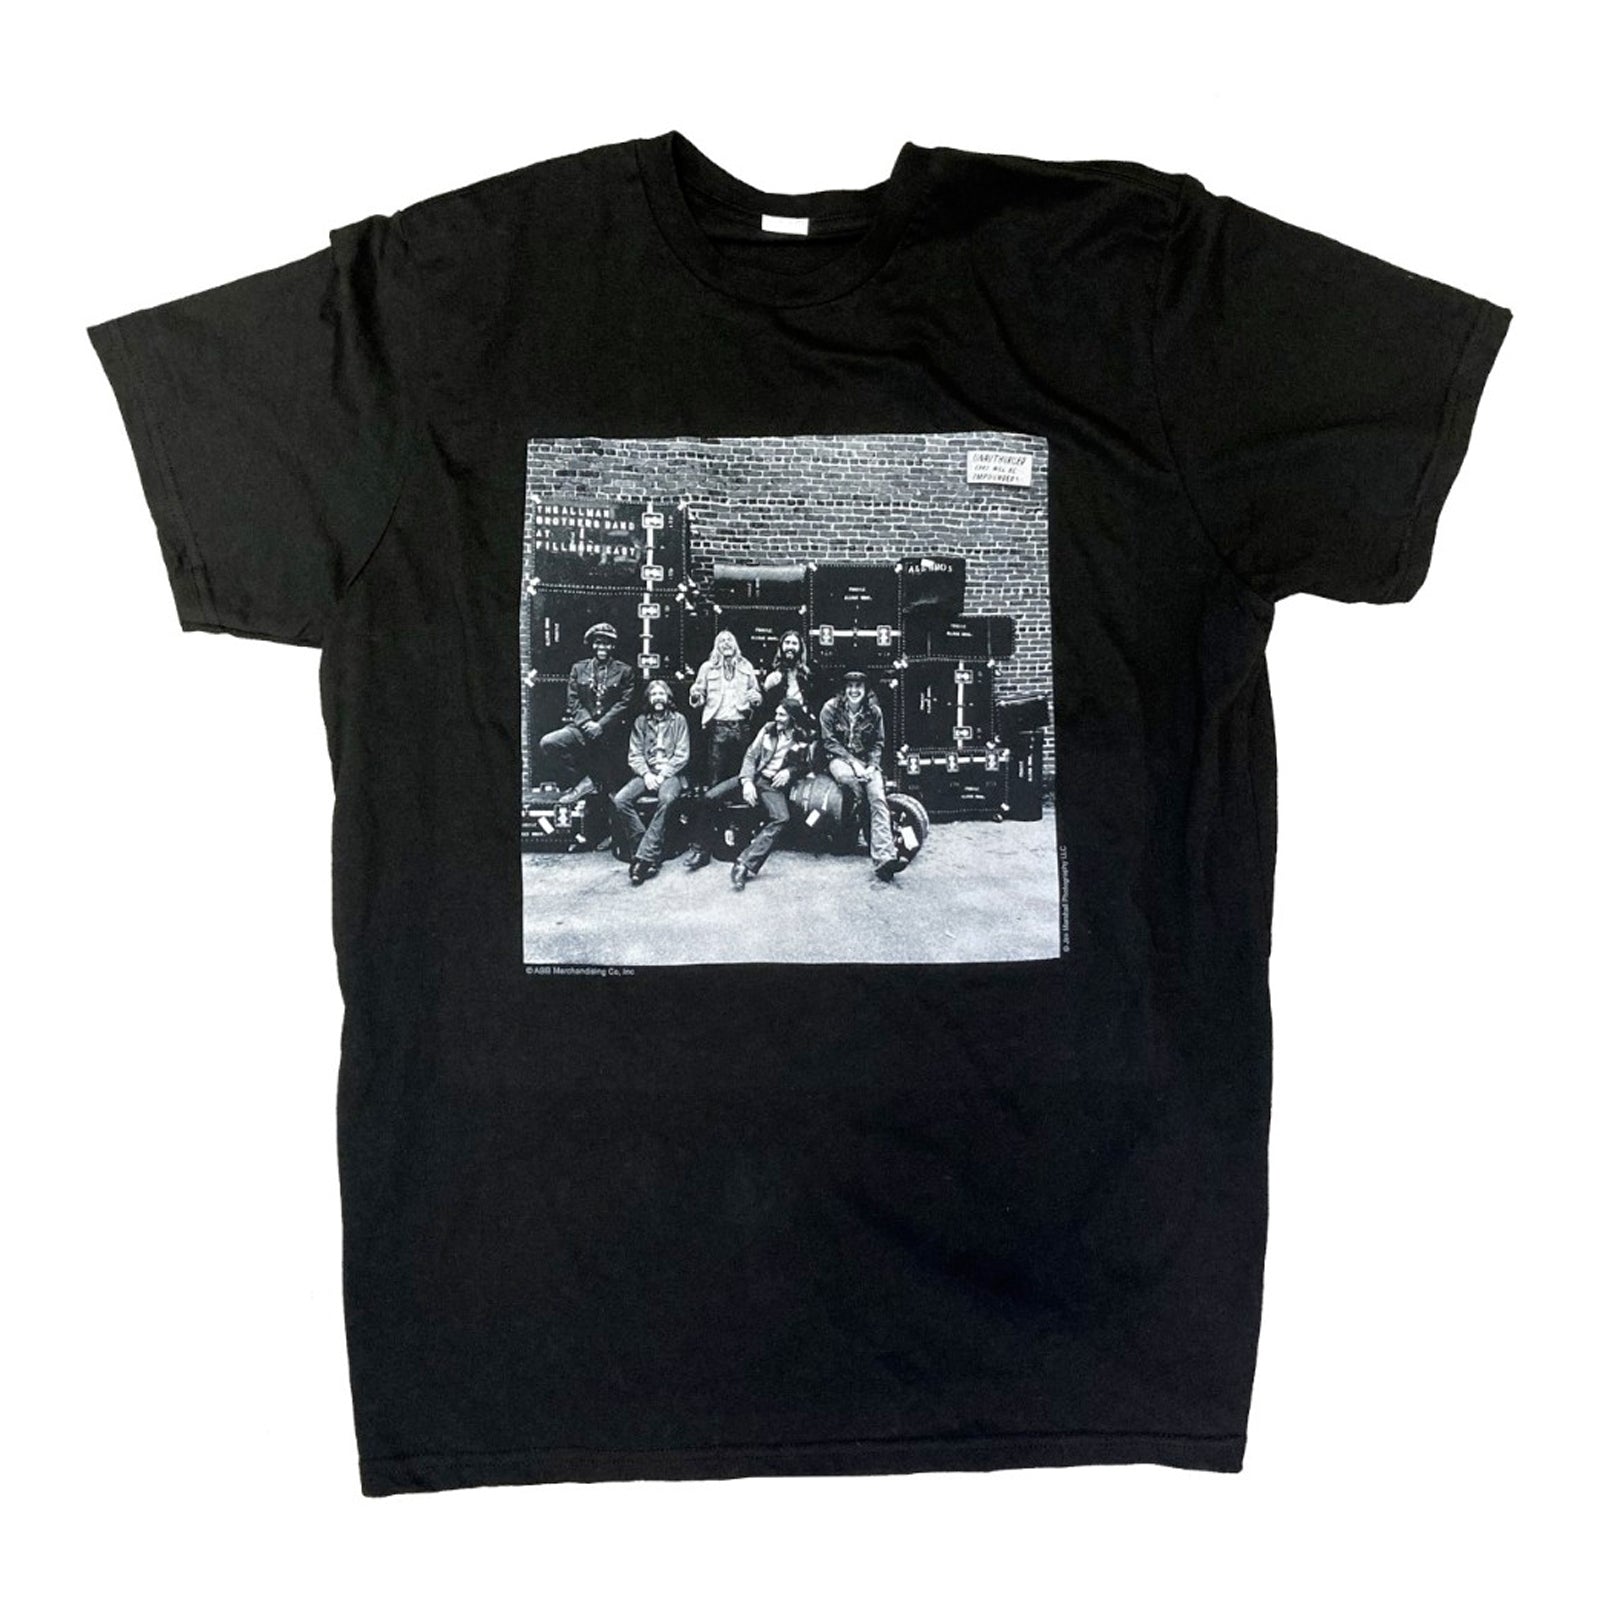 Allman Brothers Band Fillmore East Tee